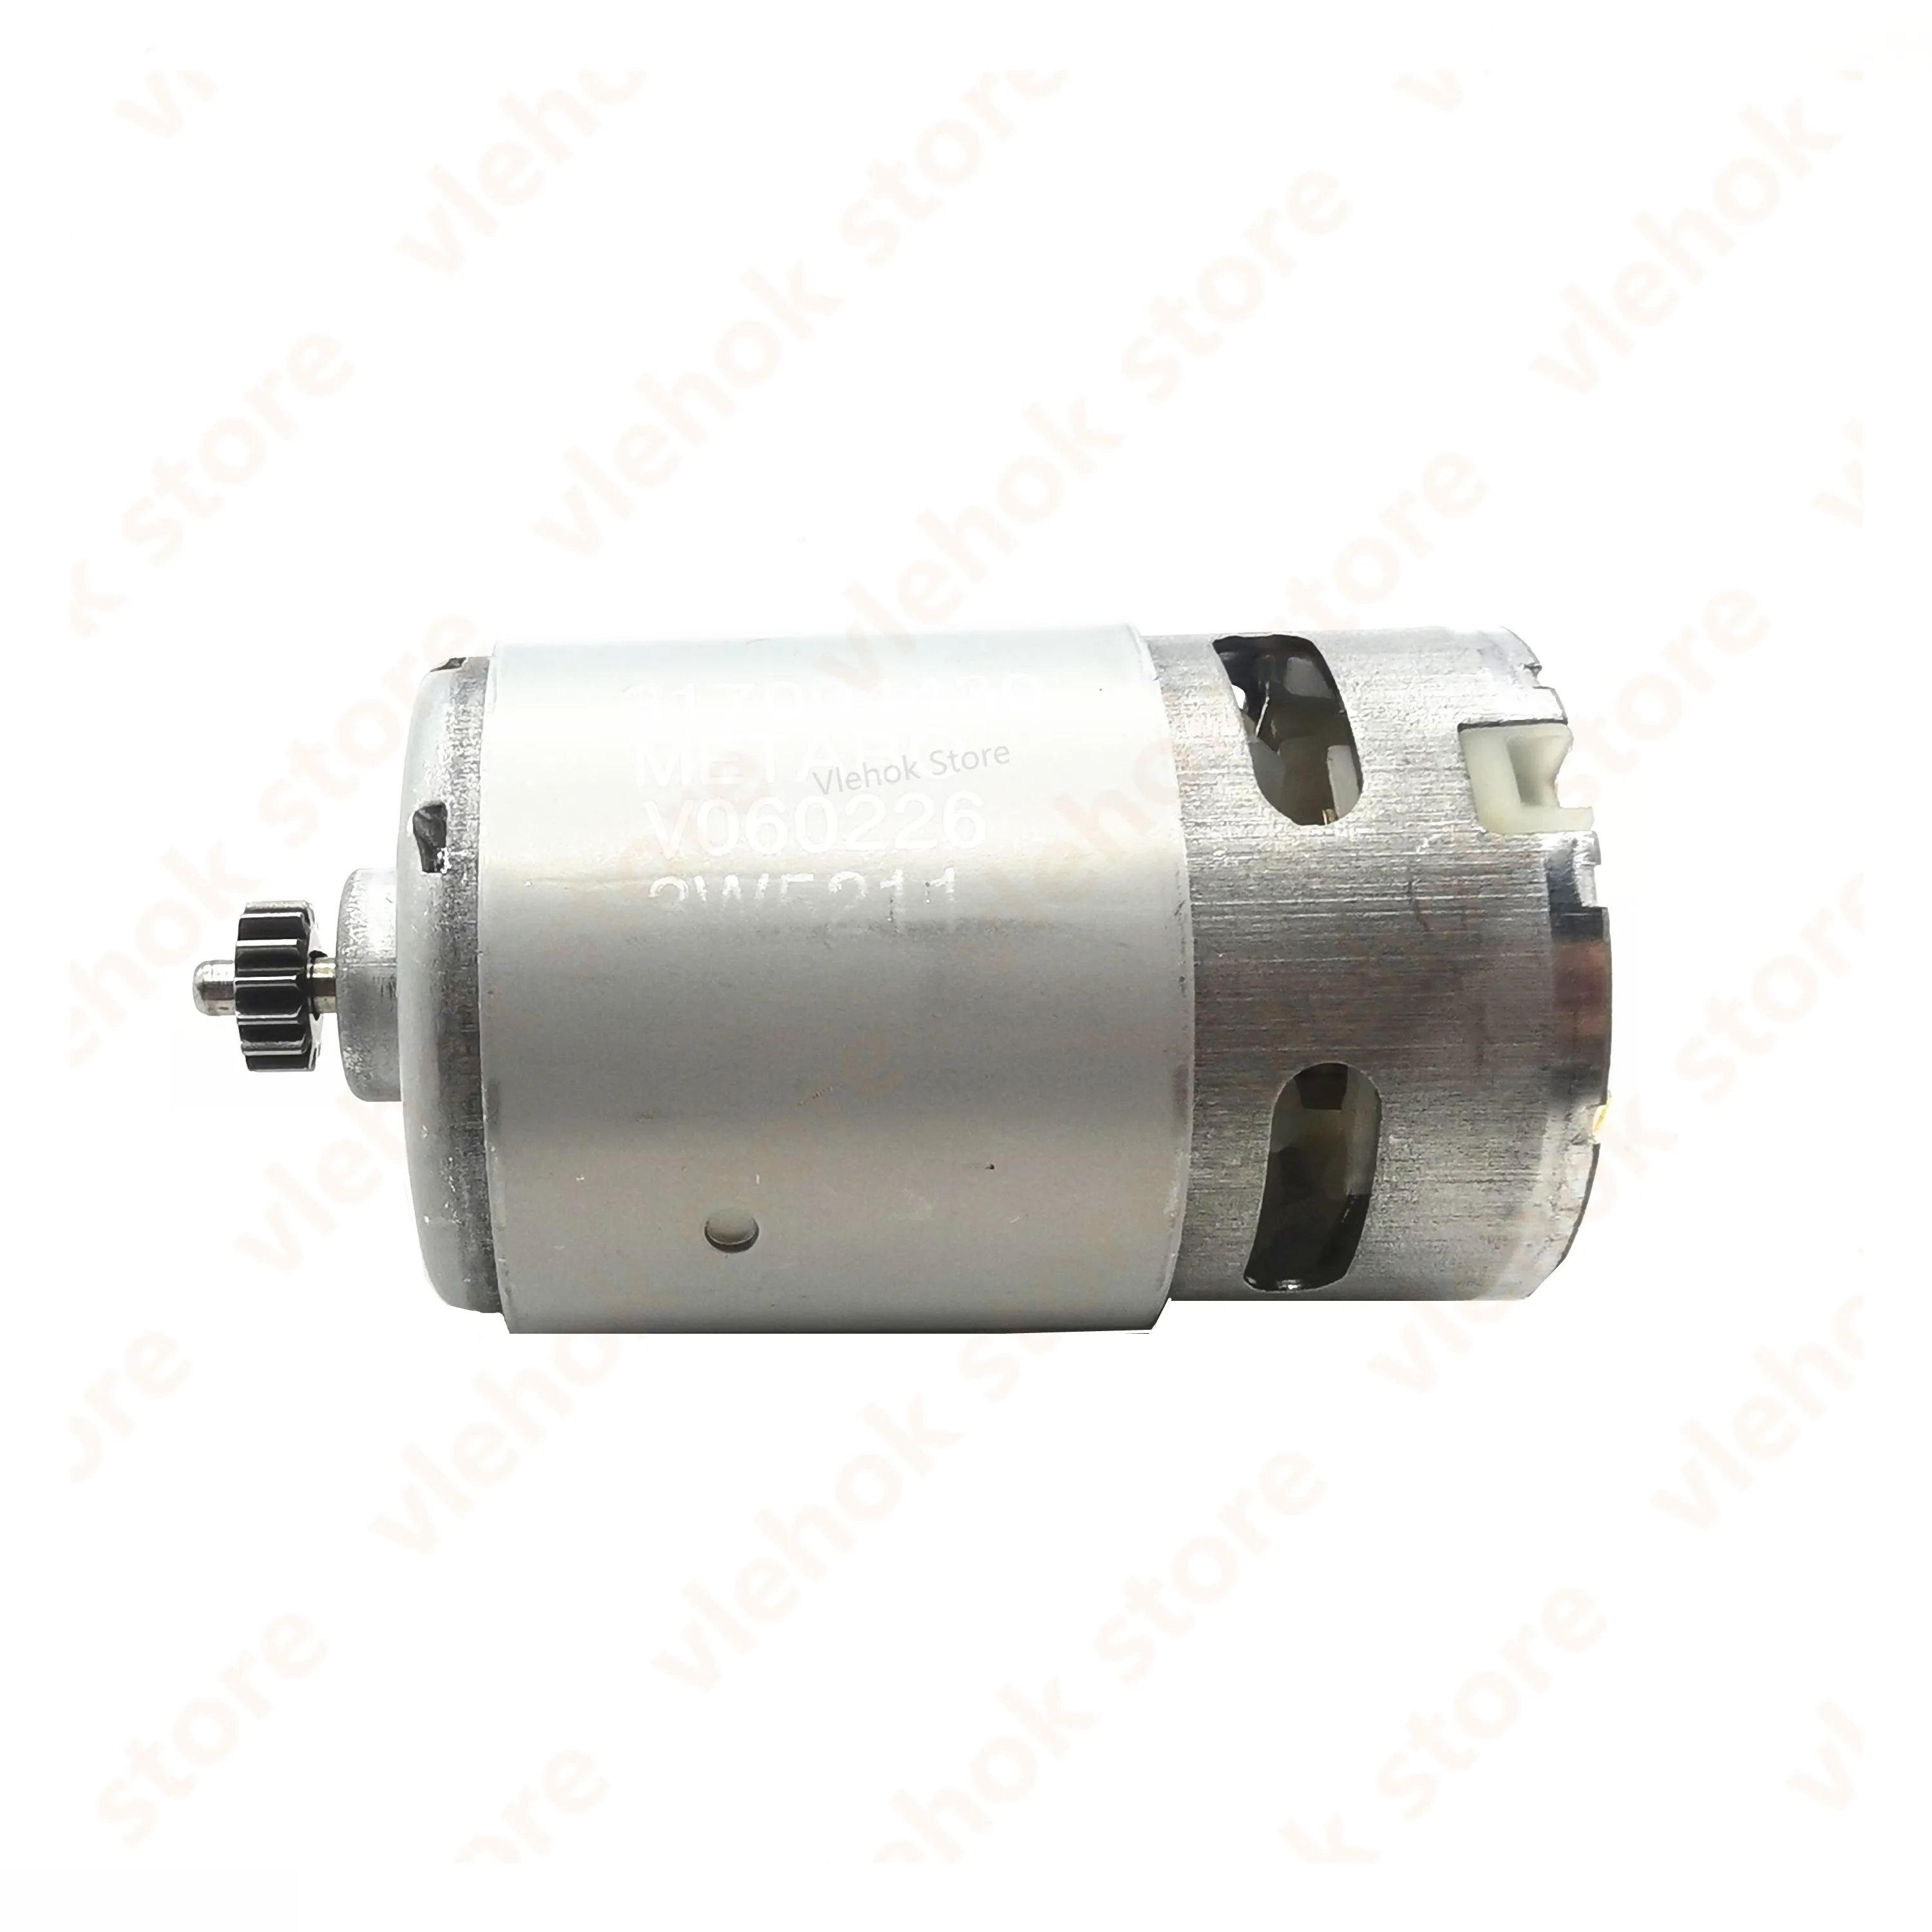 18V Motor for Metabo BS18 SB18 Quick 317004430 Power Tool Accessories  Electric tools part - AliExpress